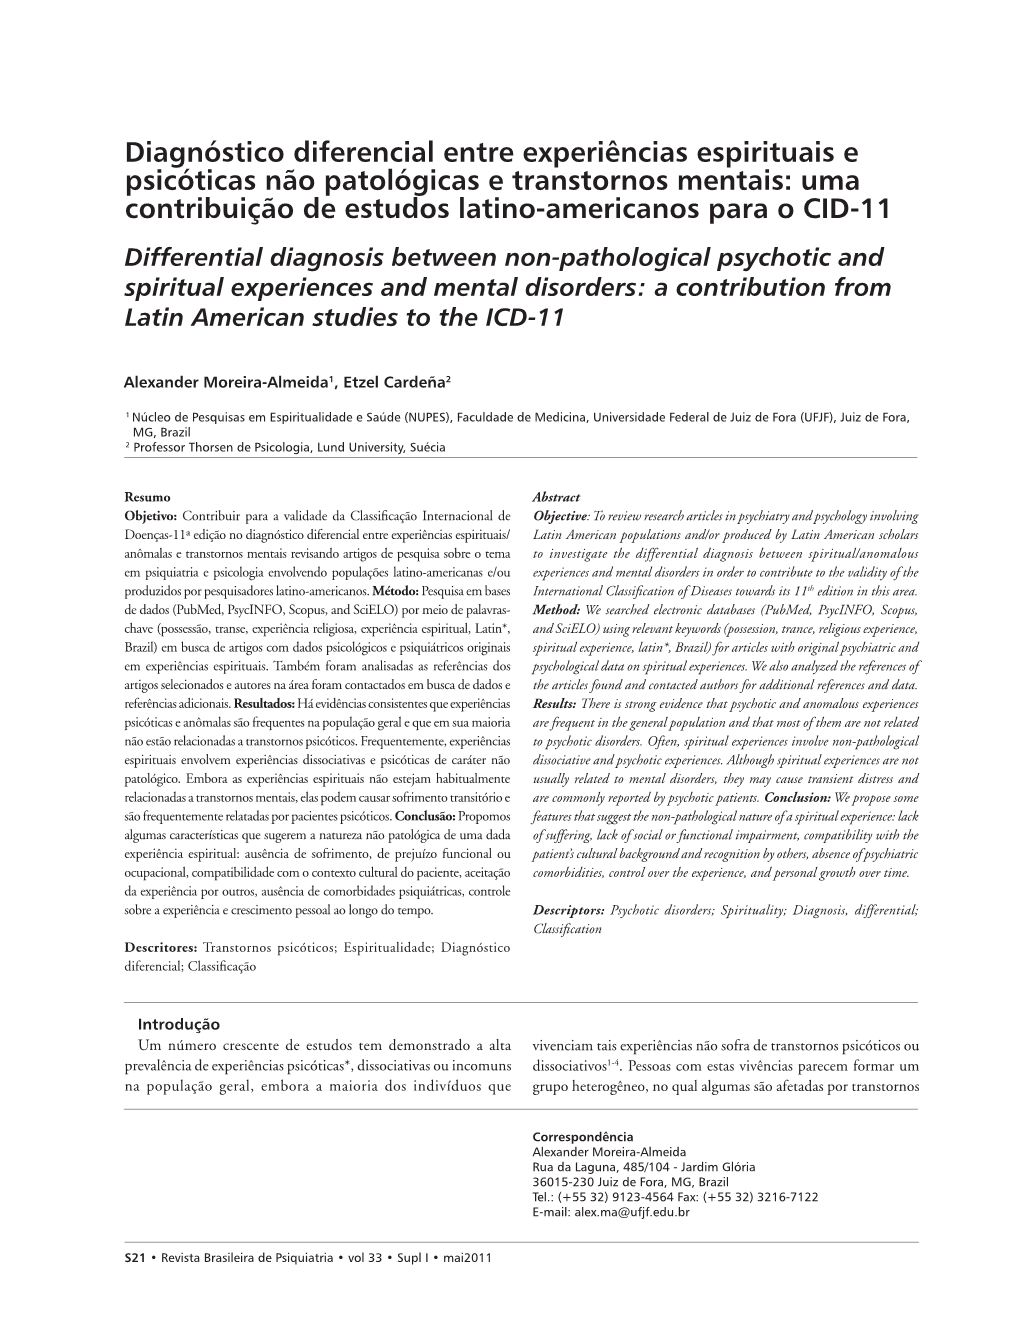 Differential Diagnosis Between Non-Pathological Psychotic and Spiritual Experiences and Mental Disorders: a Contribution from Latin American Studies to the ICD-11